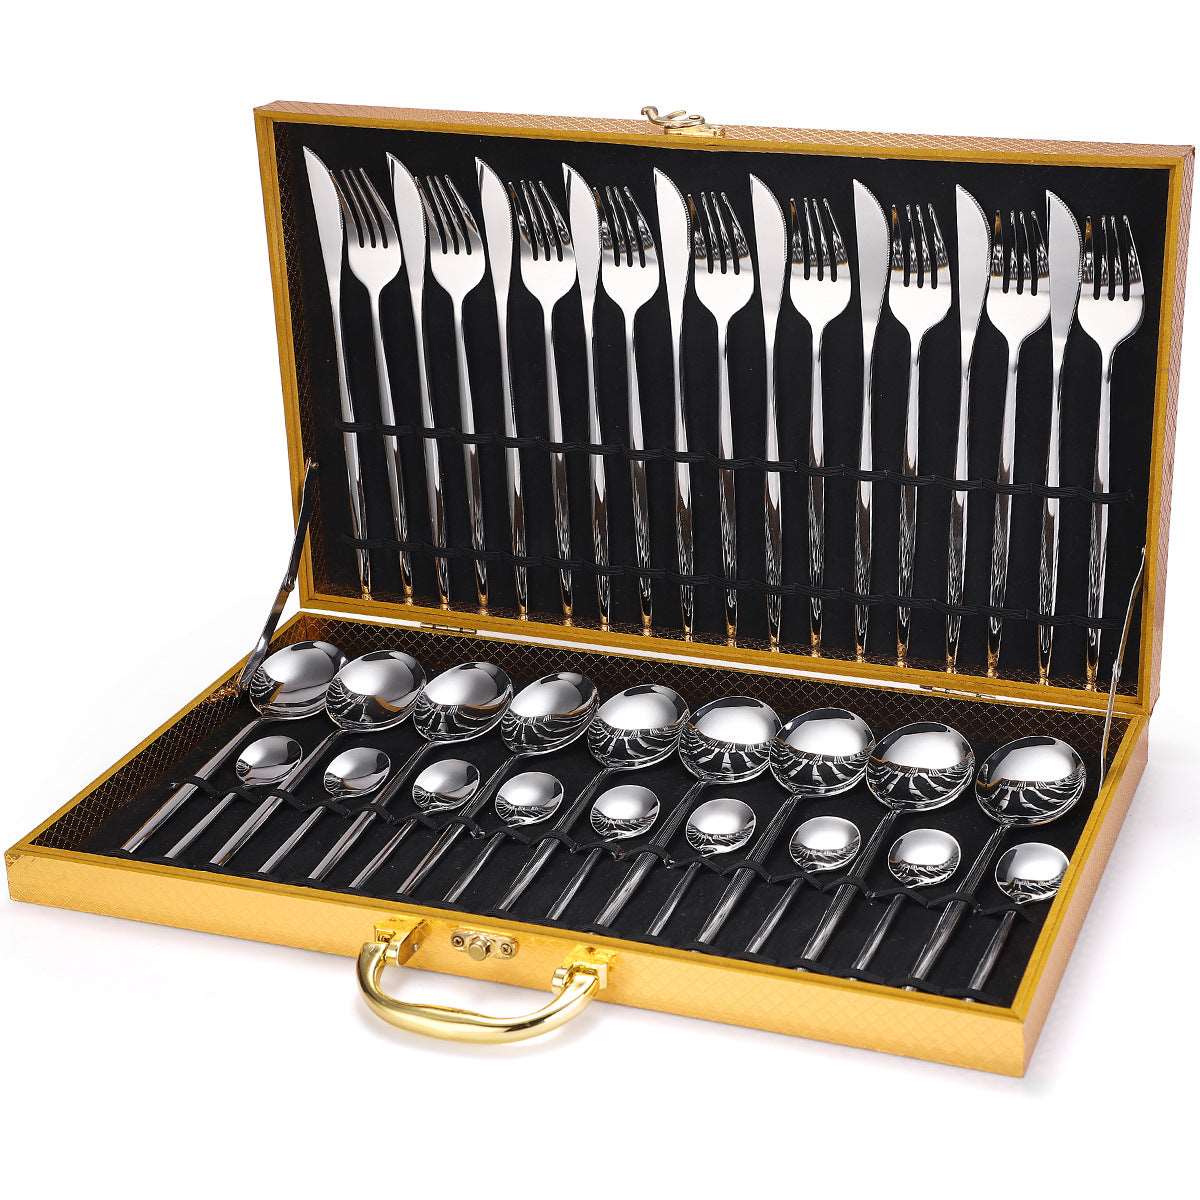 36-piece Stainless Steel Tableware Wooden Box Gift Box Set